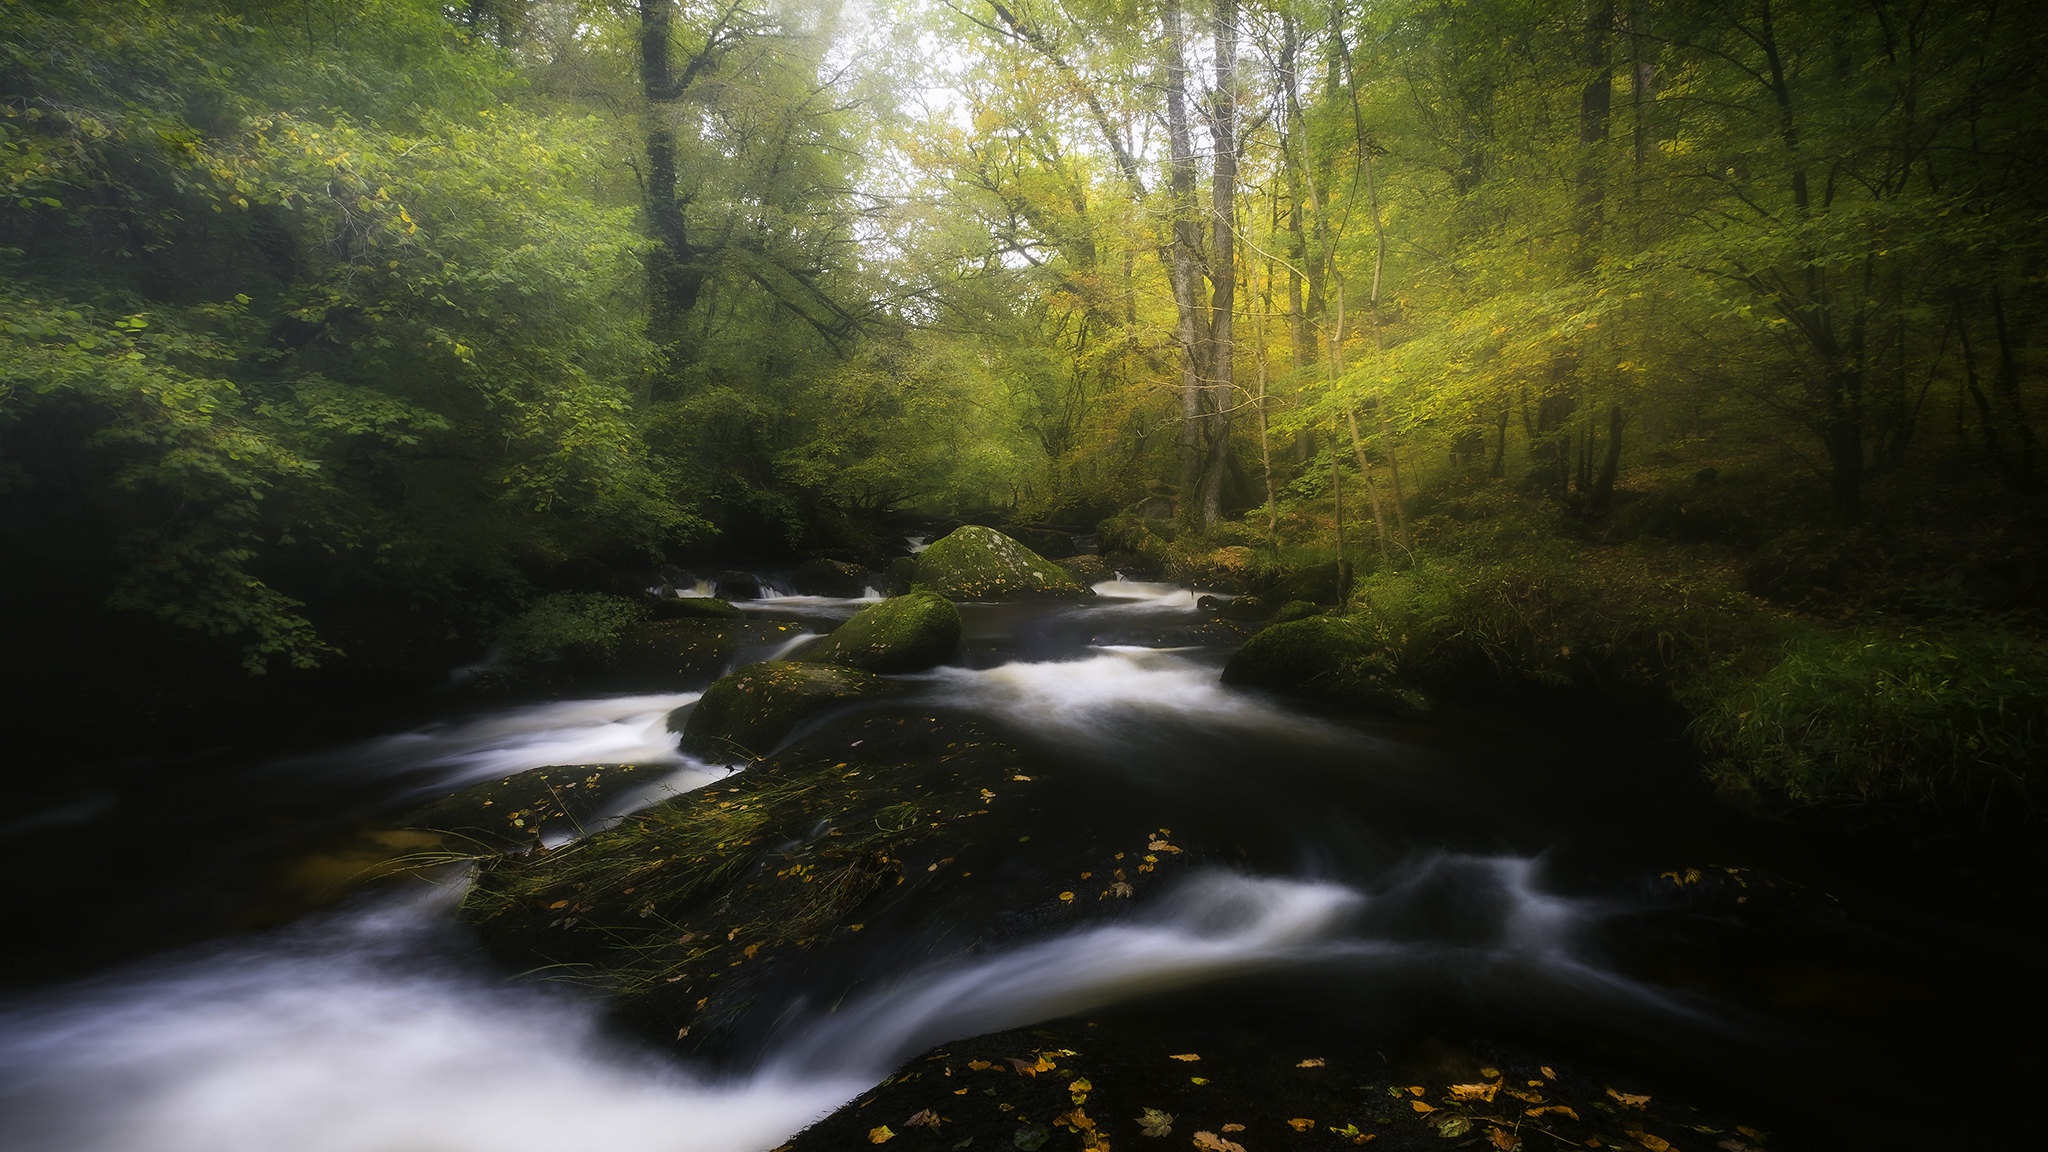 General 2048x1152 outdoors nature trees plants creeks long exposure forest